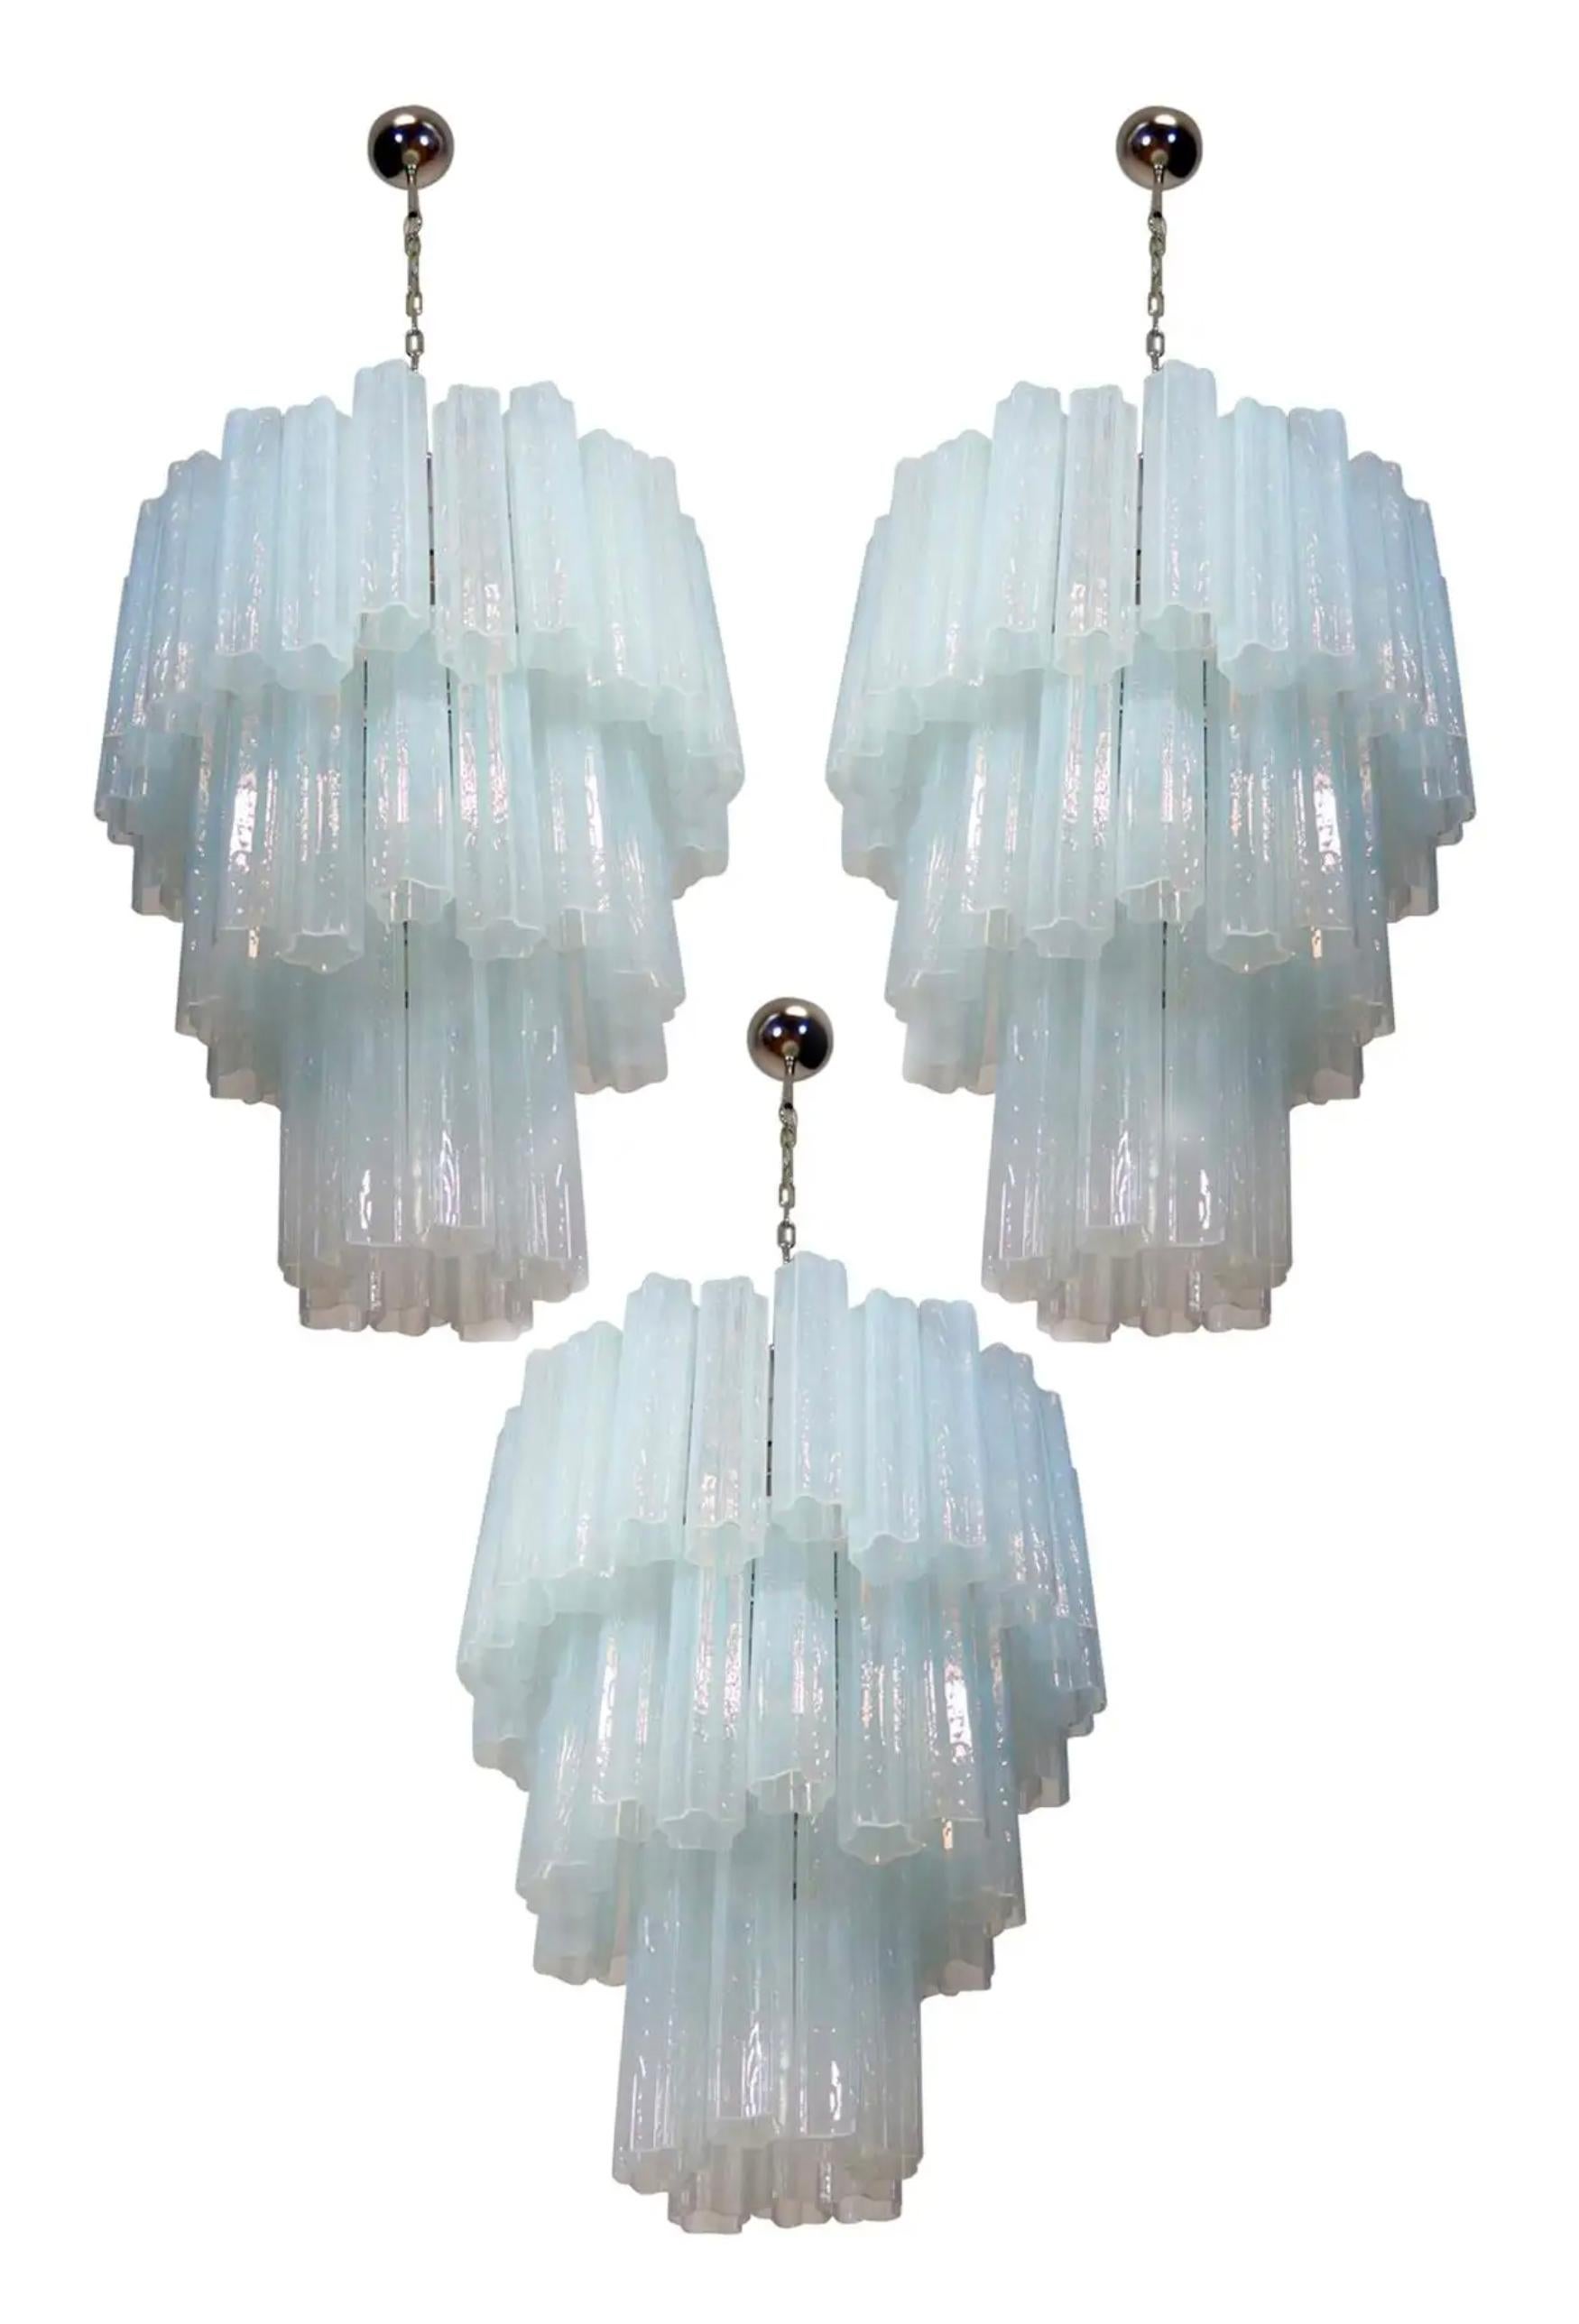 Each chandelier includes precious 48 Tronchi Murano glass 30 has cm long. Measures: Diameter 65 cm, height 75 cm. 14 lights.

Dimensions: 59 inches (150 cm) height with chain, 29.50 inches (75 cm) height without chain; 25.60 inches (65 cm)